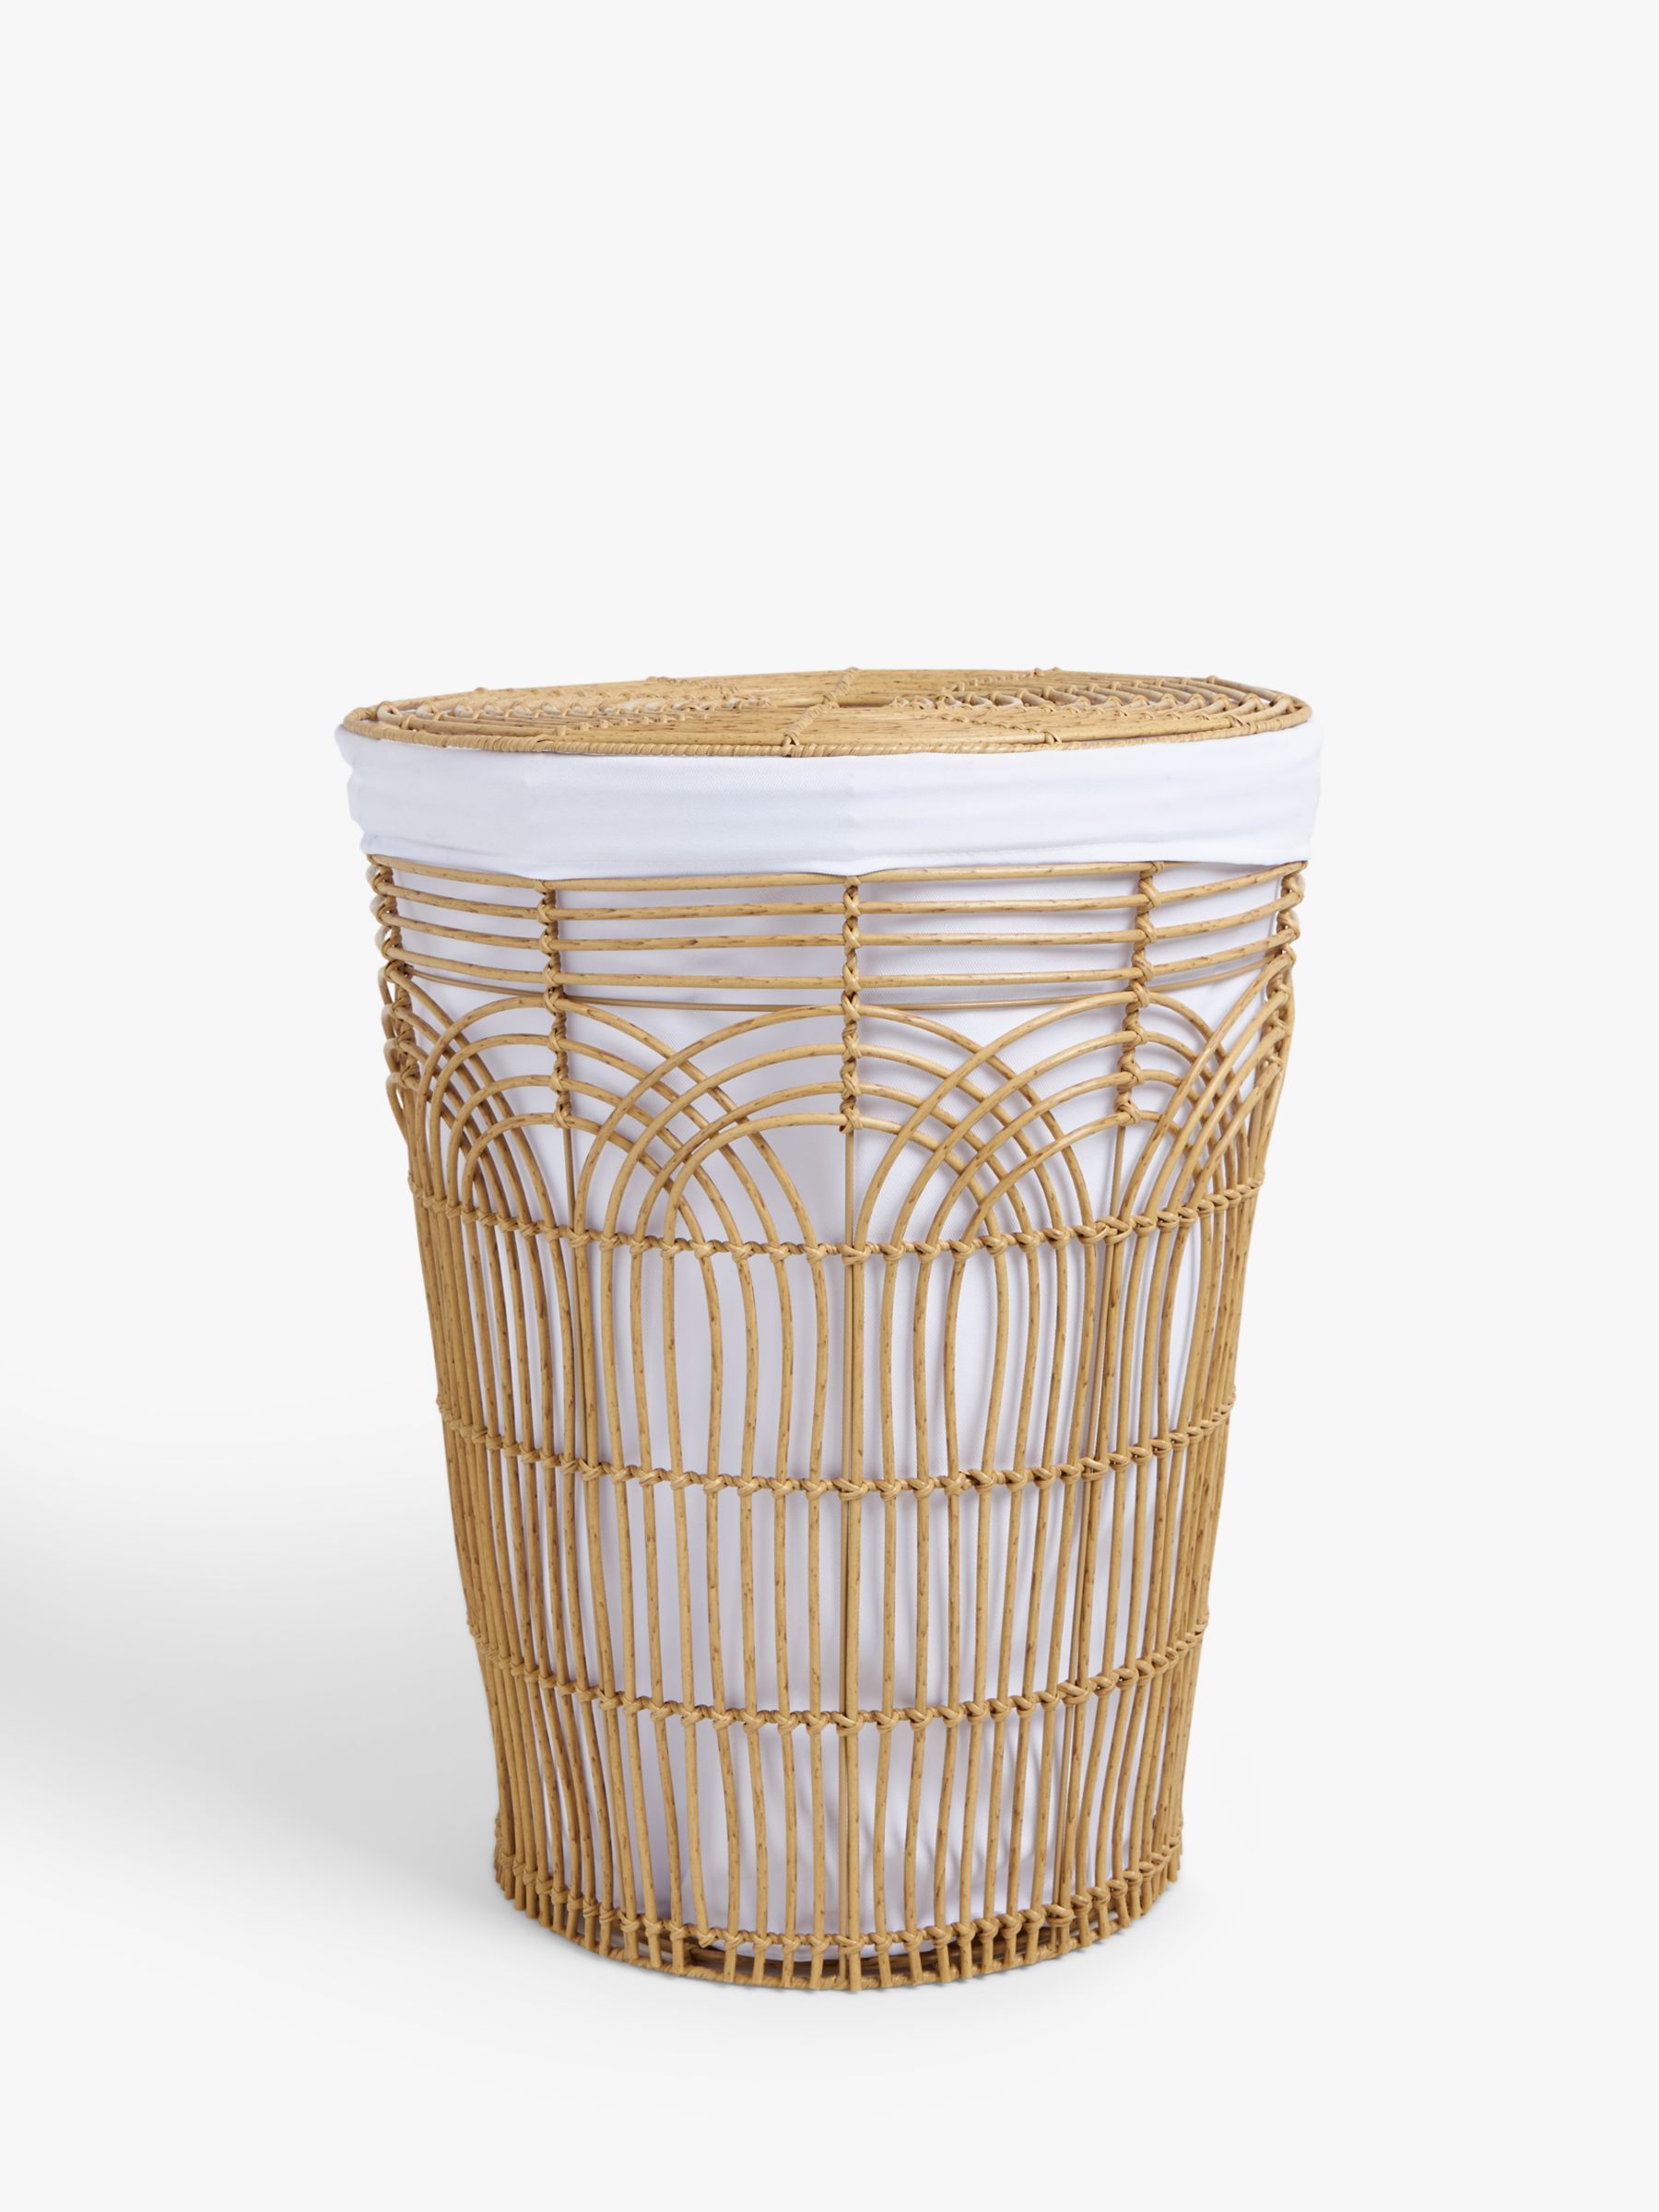 John Lewis ANYDAY Rattan Open Weave Laundry Basket, Natural/Greige